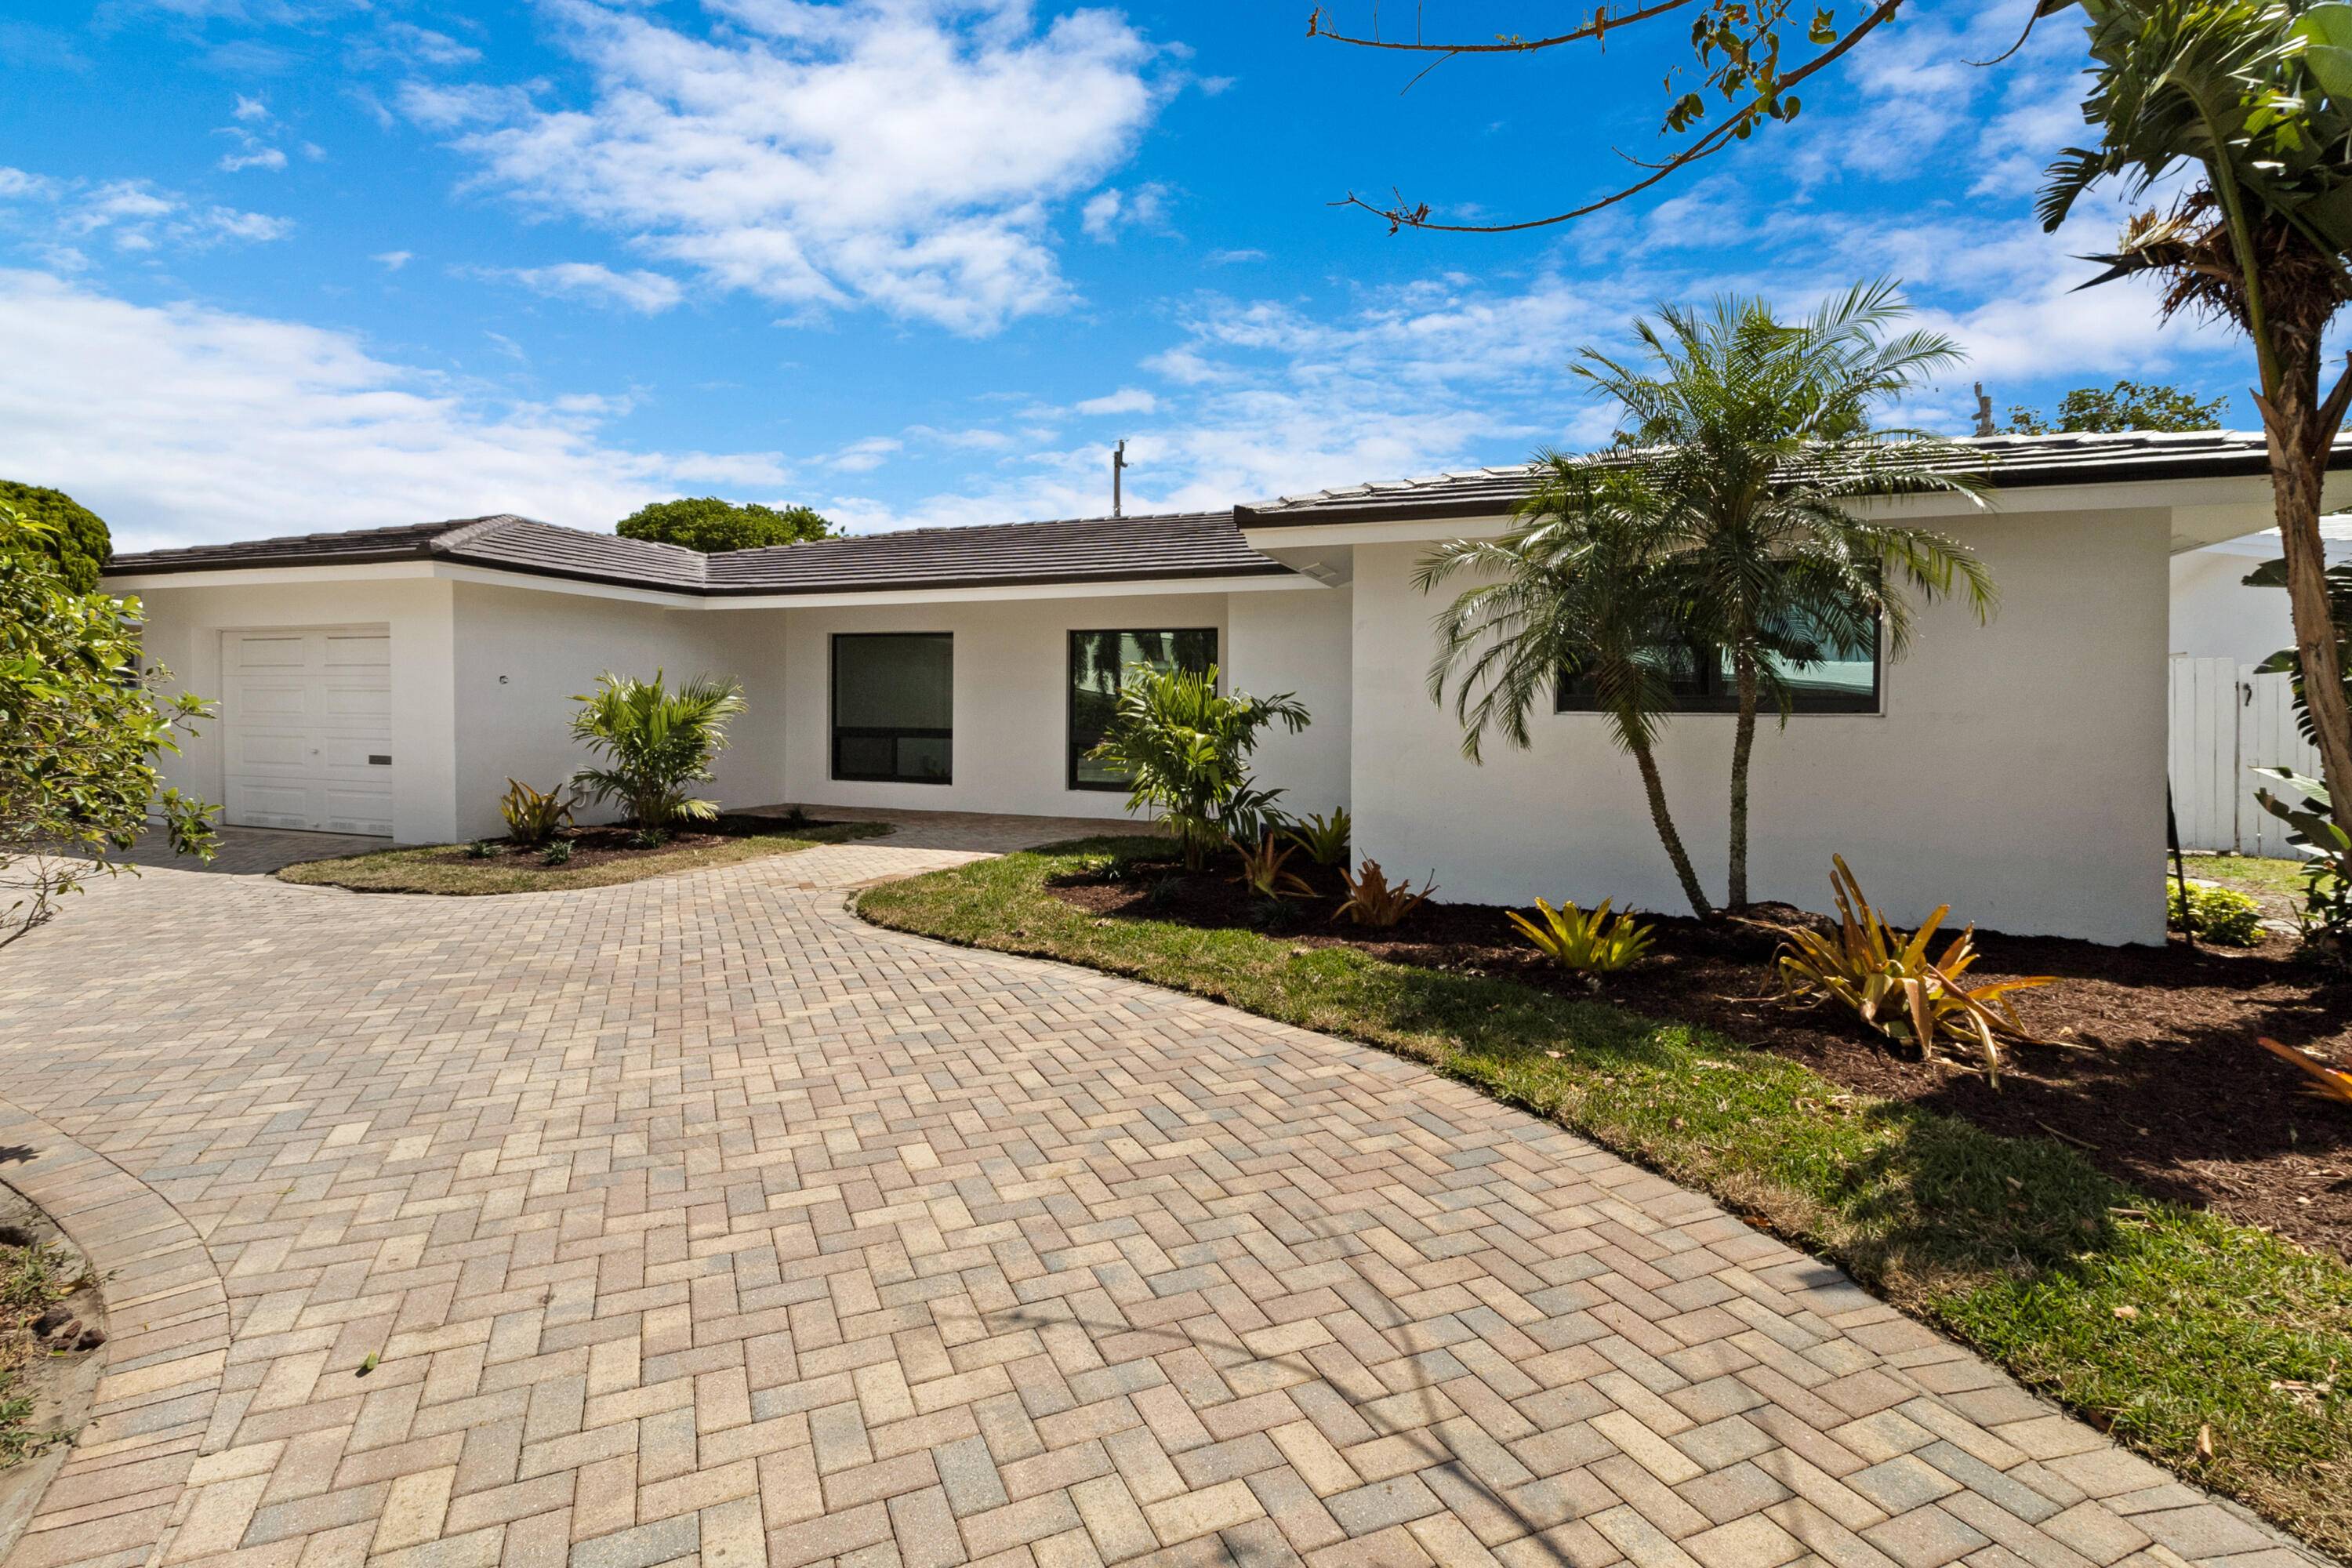 ALL NEW 3 BED HOME in acclaimed IMPERIAL POINT, one of the few subdivisions w sidewalks, street lights, and only a mile to the famous LAUDERDALE BY THE SEA BEACH.